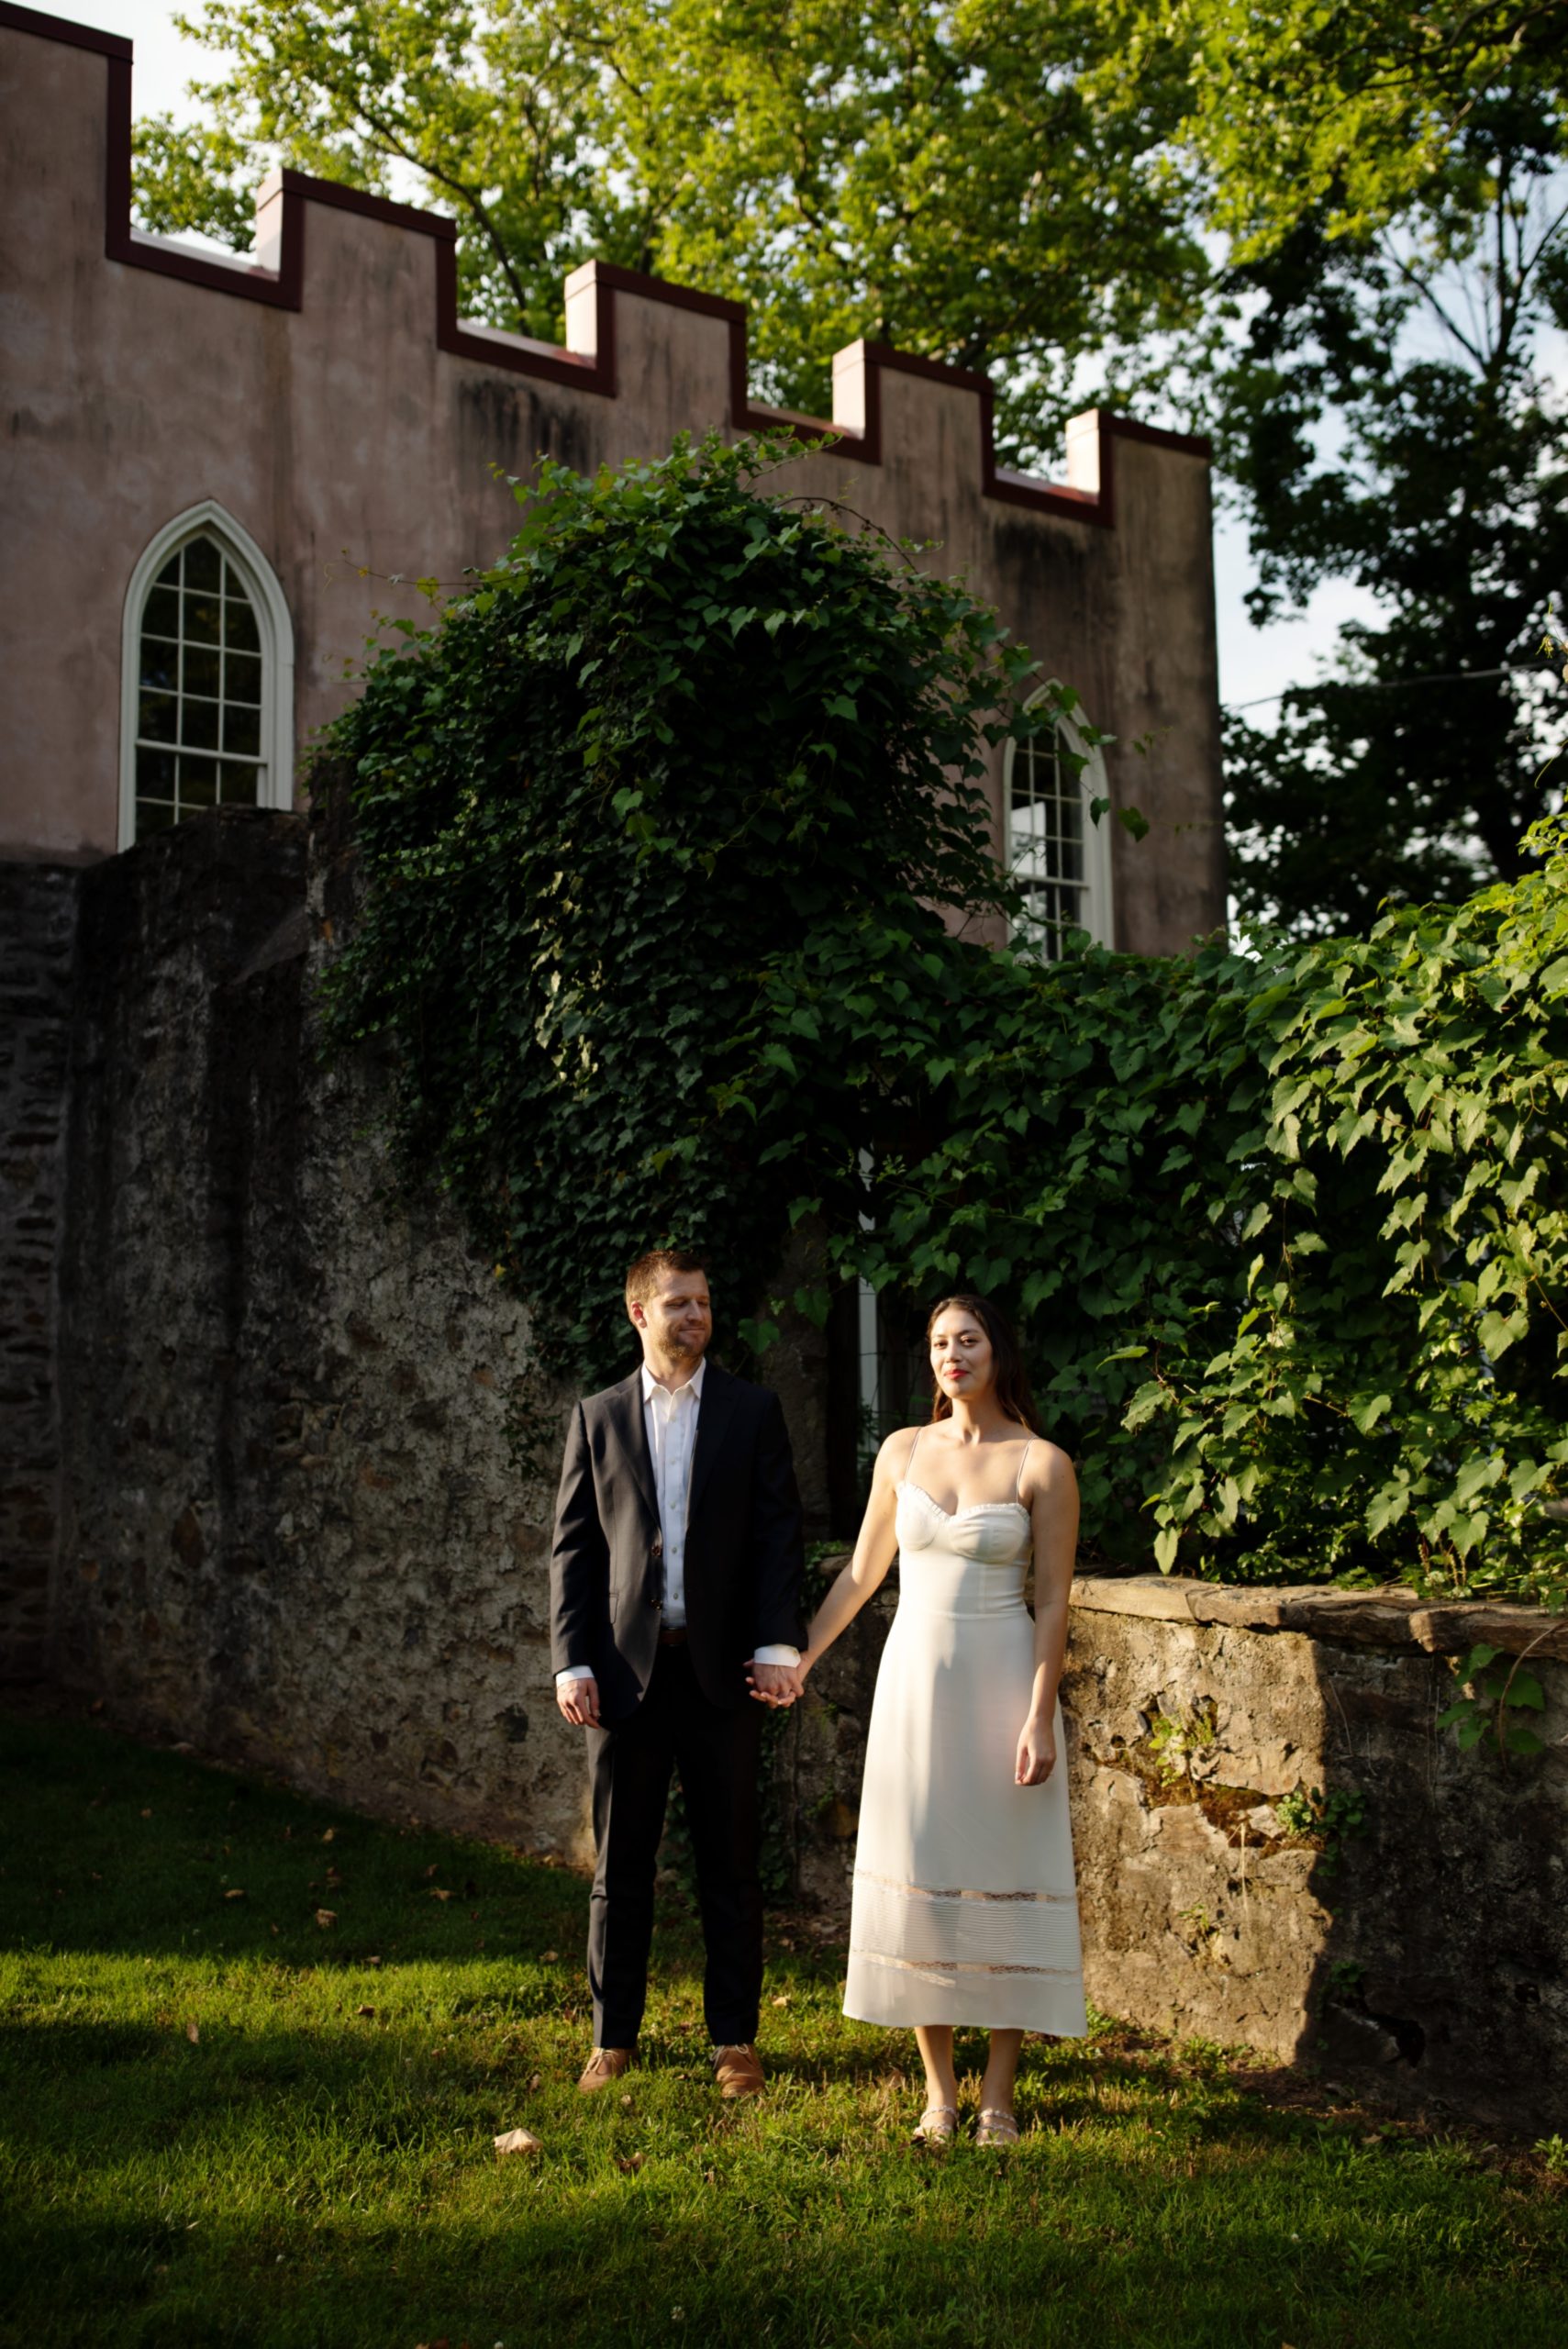 The Highlands Mansion and Gardens Engagement Photos-Philadelphia Engagement and Wedding Photographer, Highlands Mansion Wedding and Elopement Photographer